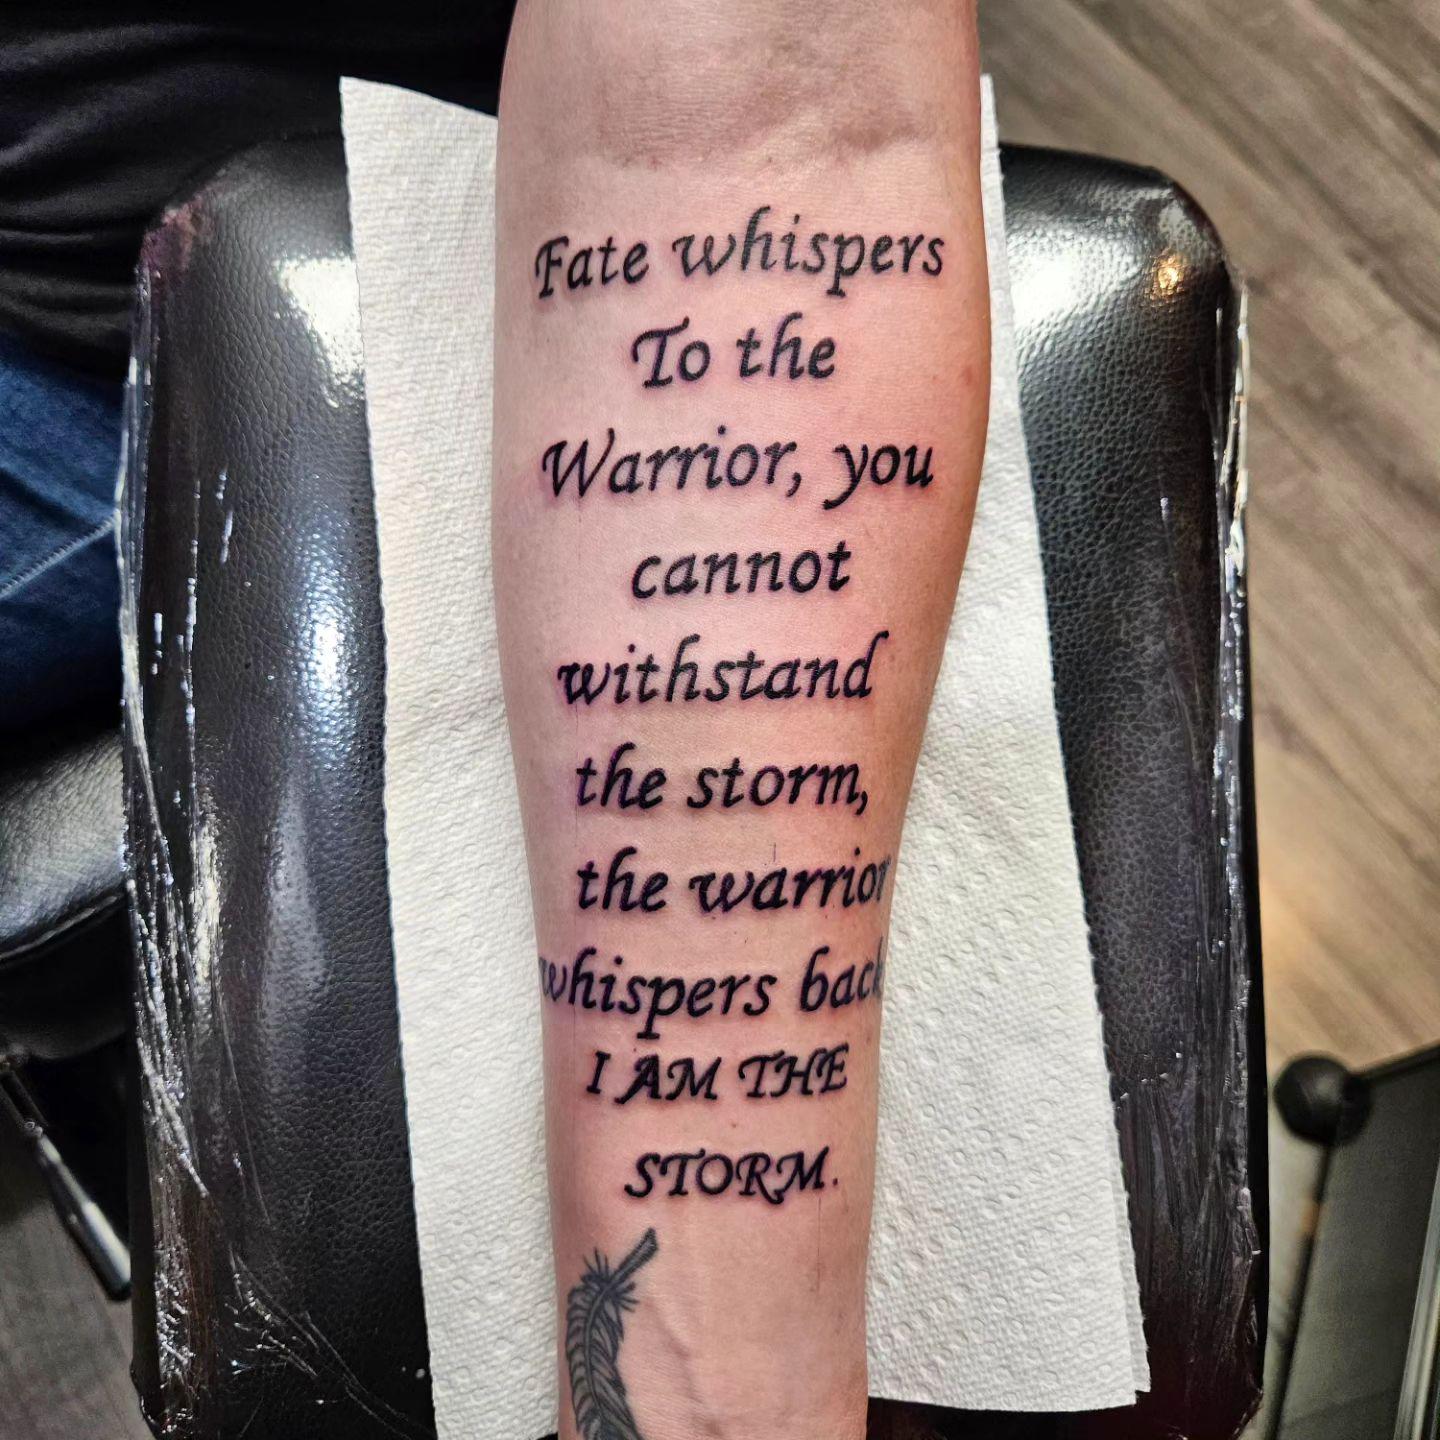 Fate whispers to the warrior You cannot withstand the storm and the warrior  whispers back I am the storm  tattoo script free scetch